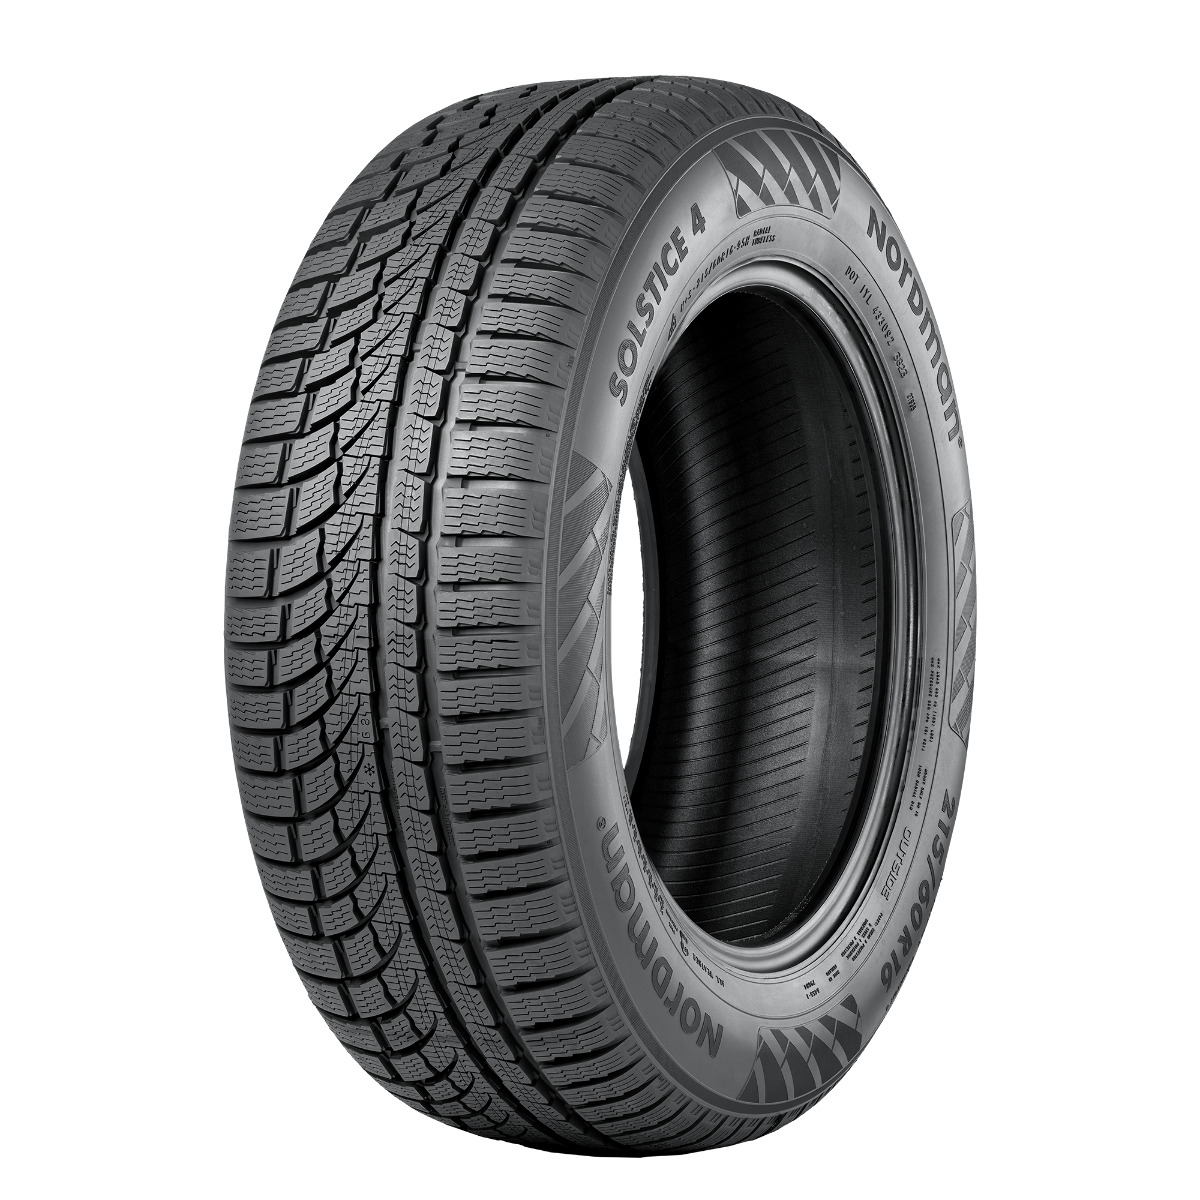 195/65R15 91H Nordman Solstice 4 All-Weather Tire made by Nokian 50K Warranty